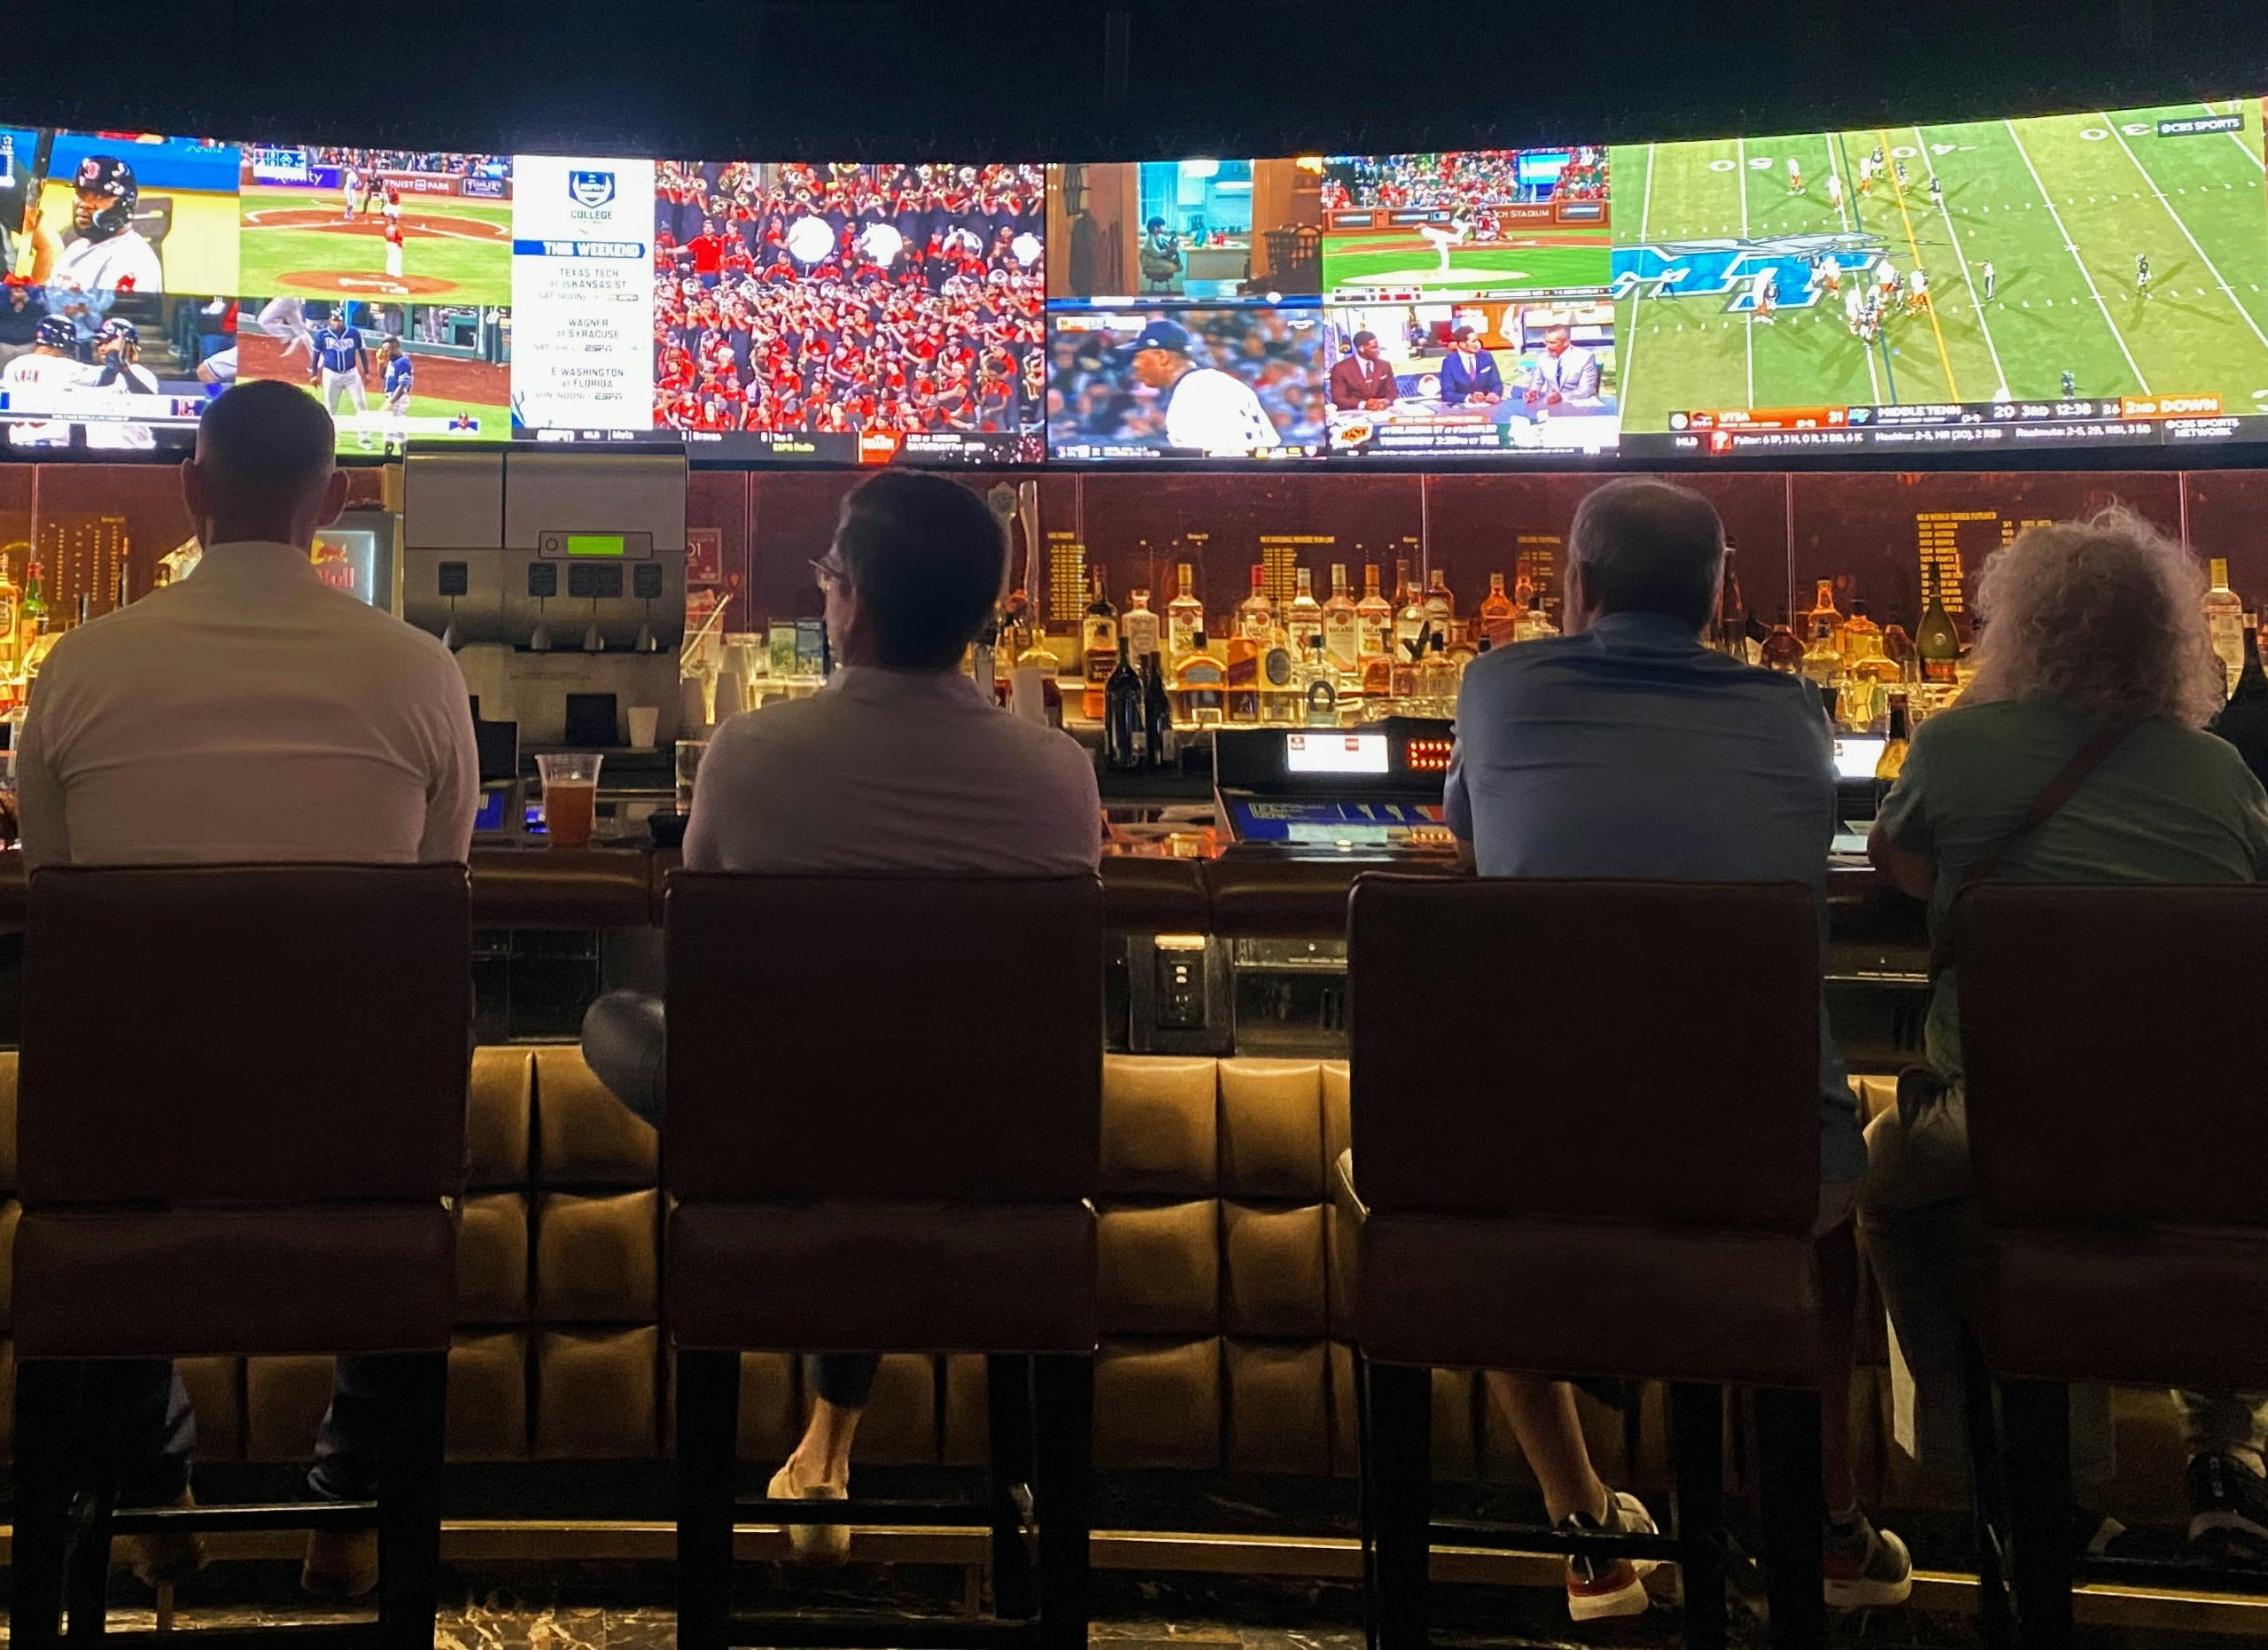 Sports bar patrons watching the game.